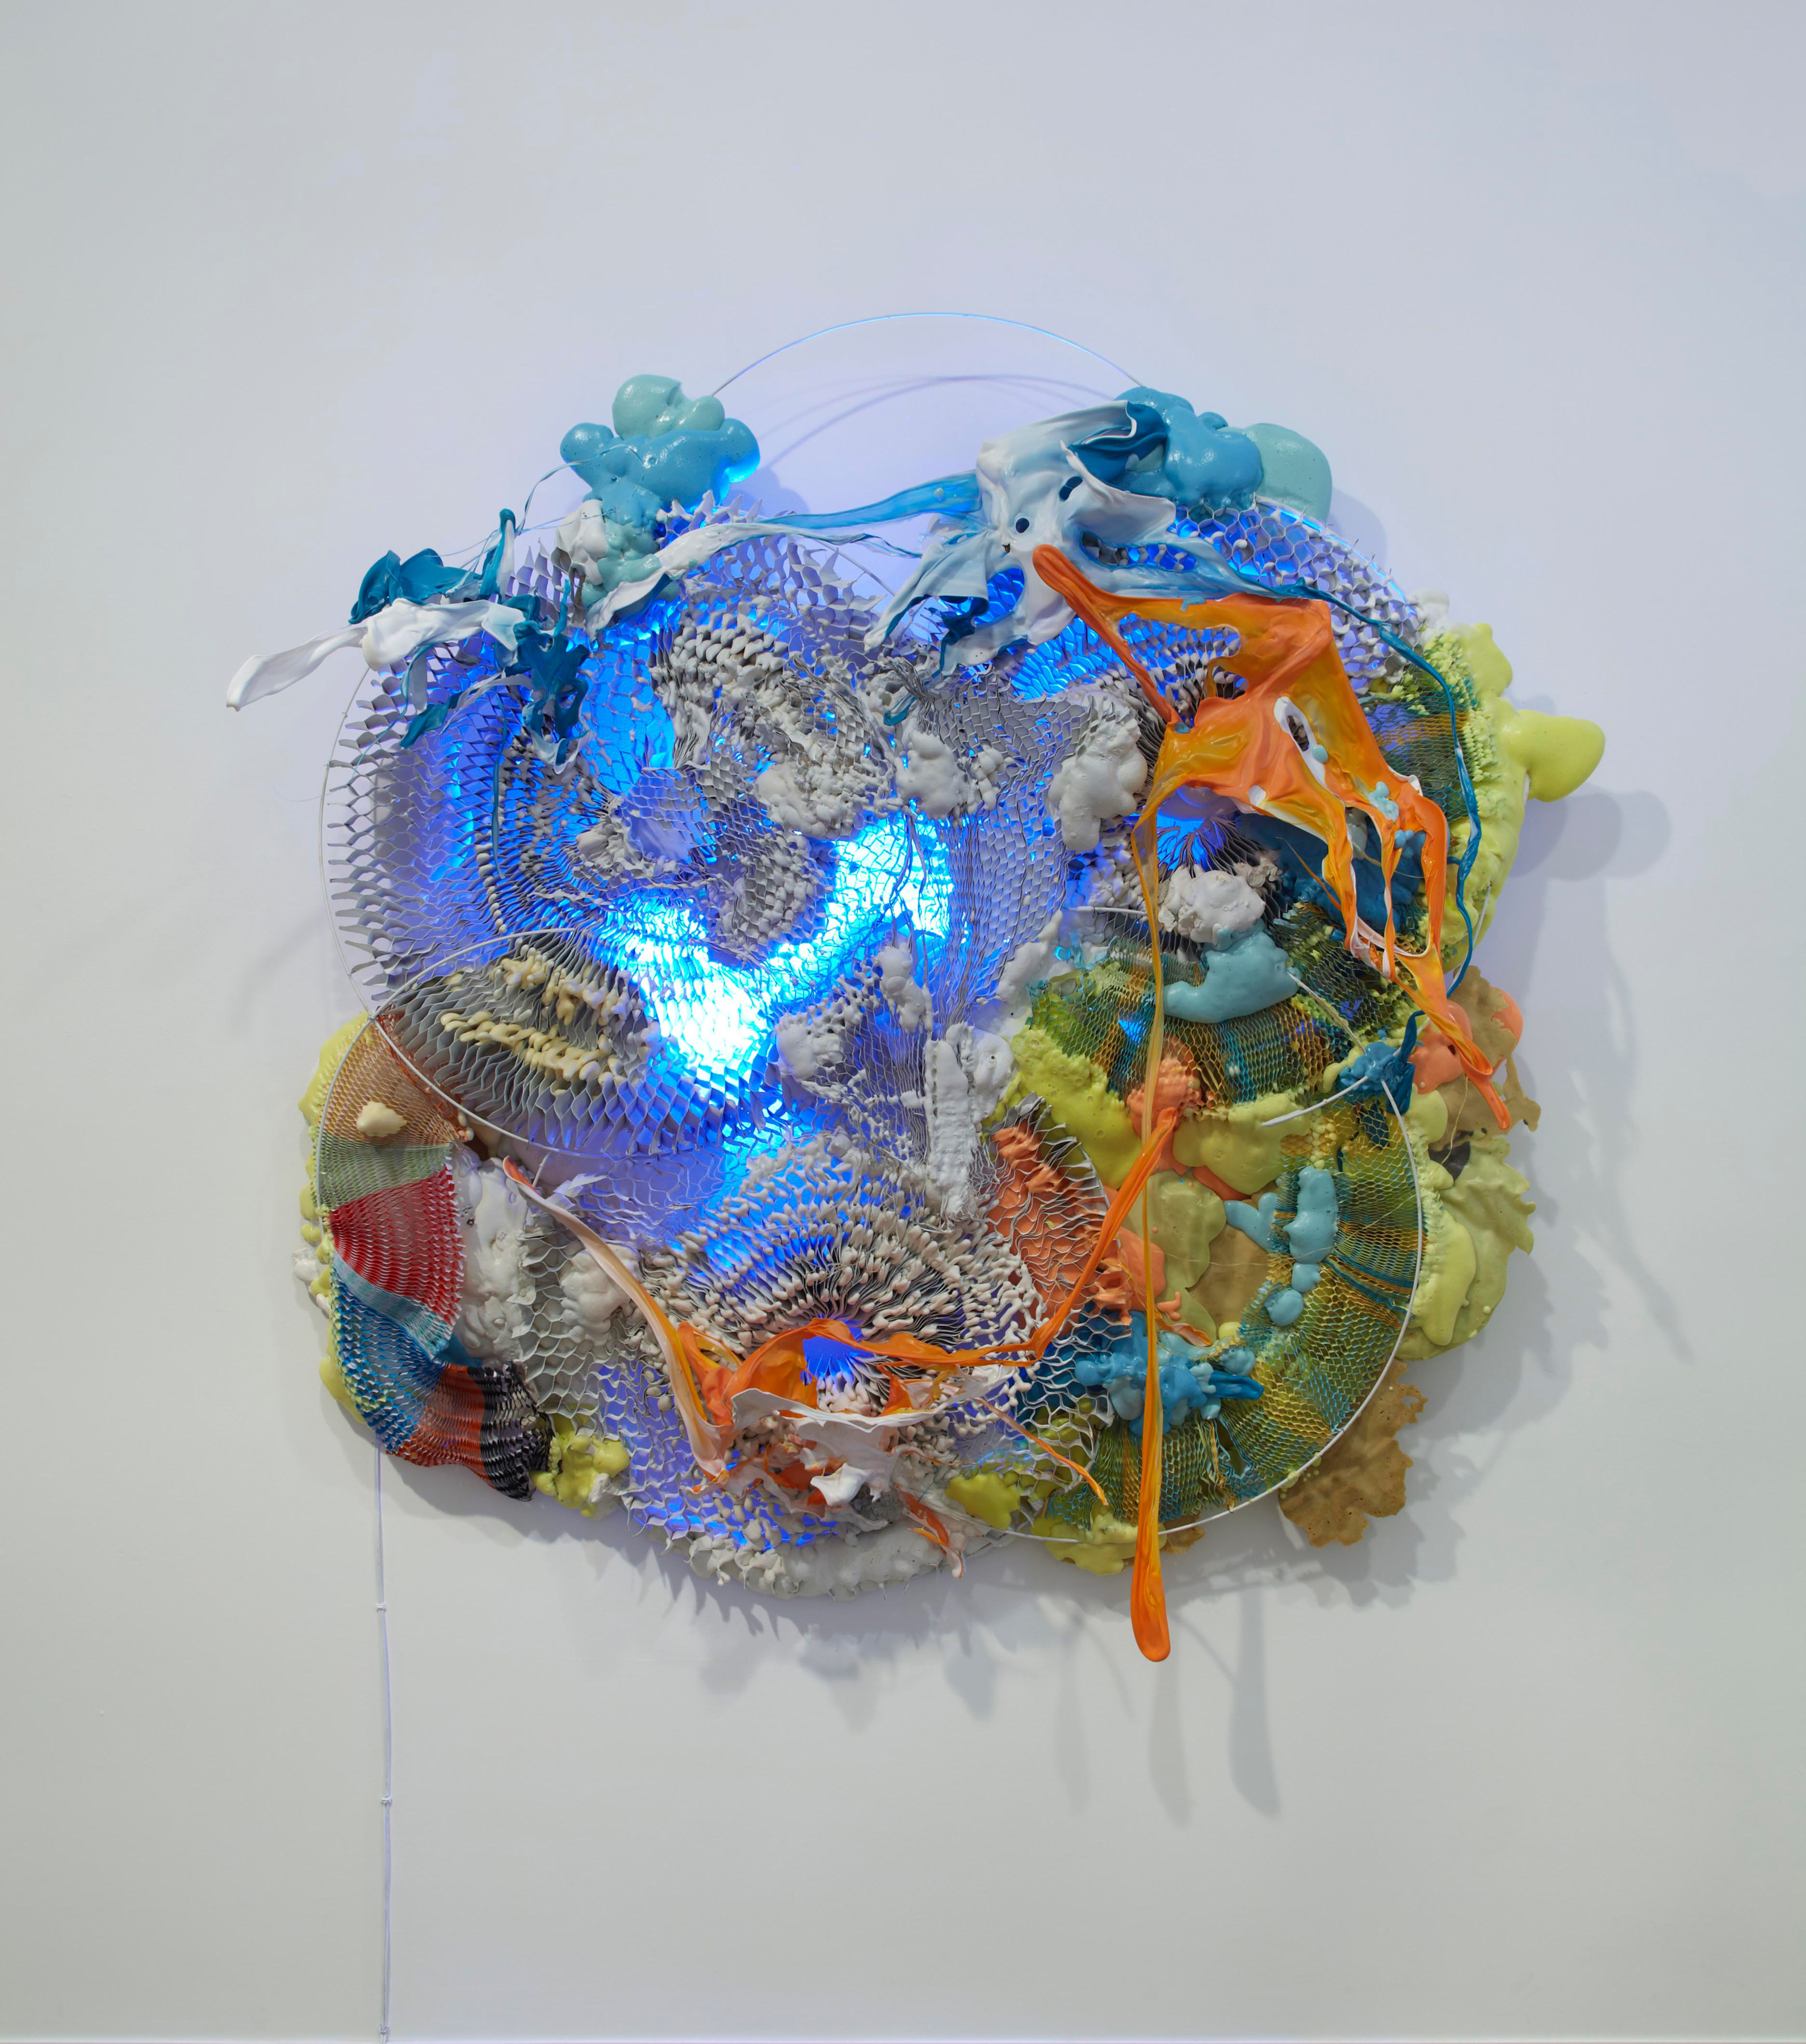 Humming in 5 Parts,&nbsp;2012, Honeycomb cardboard, melted plastics, expanded foam, mild steel rod, fluorescent light, 61 x 61 x 12 inches, MMG#20617